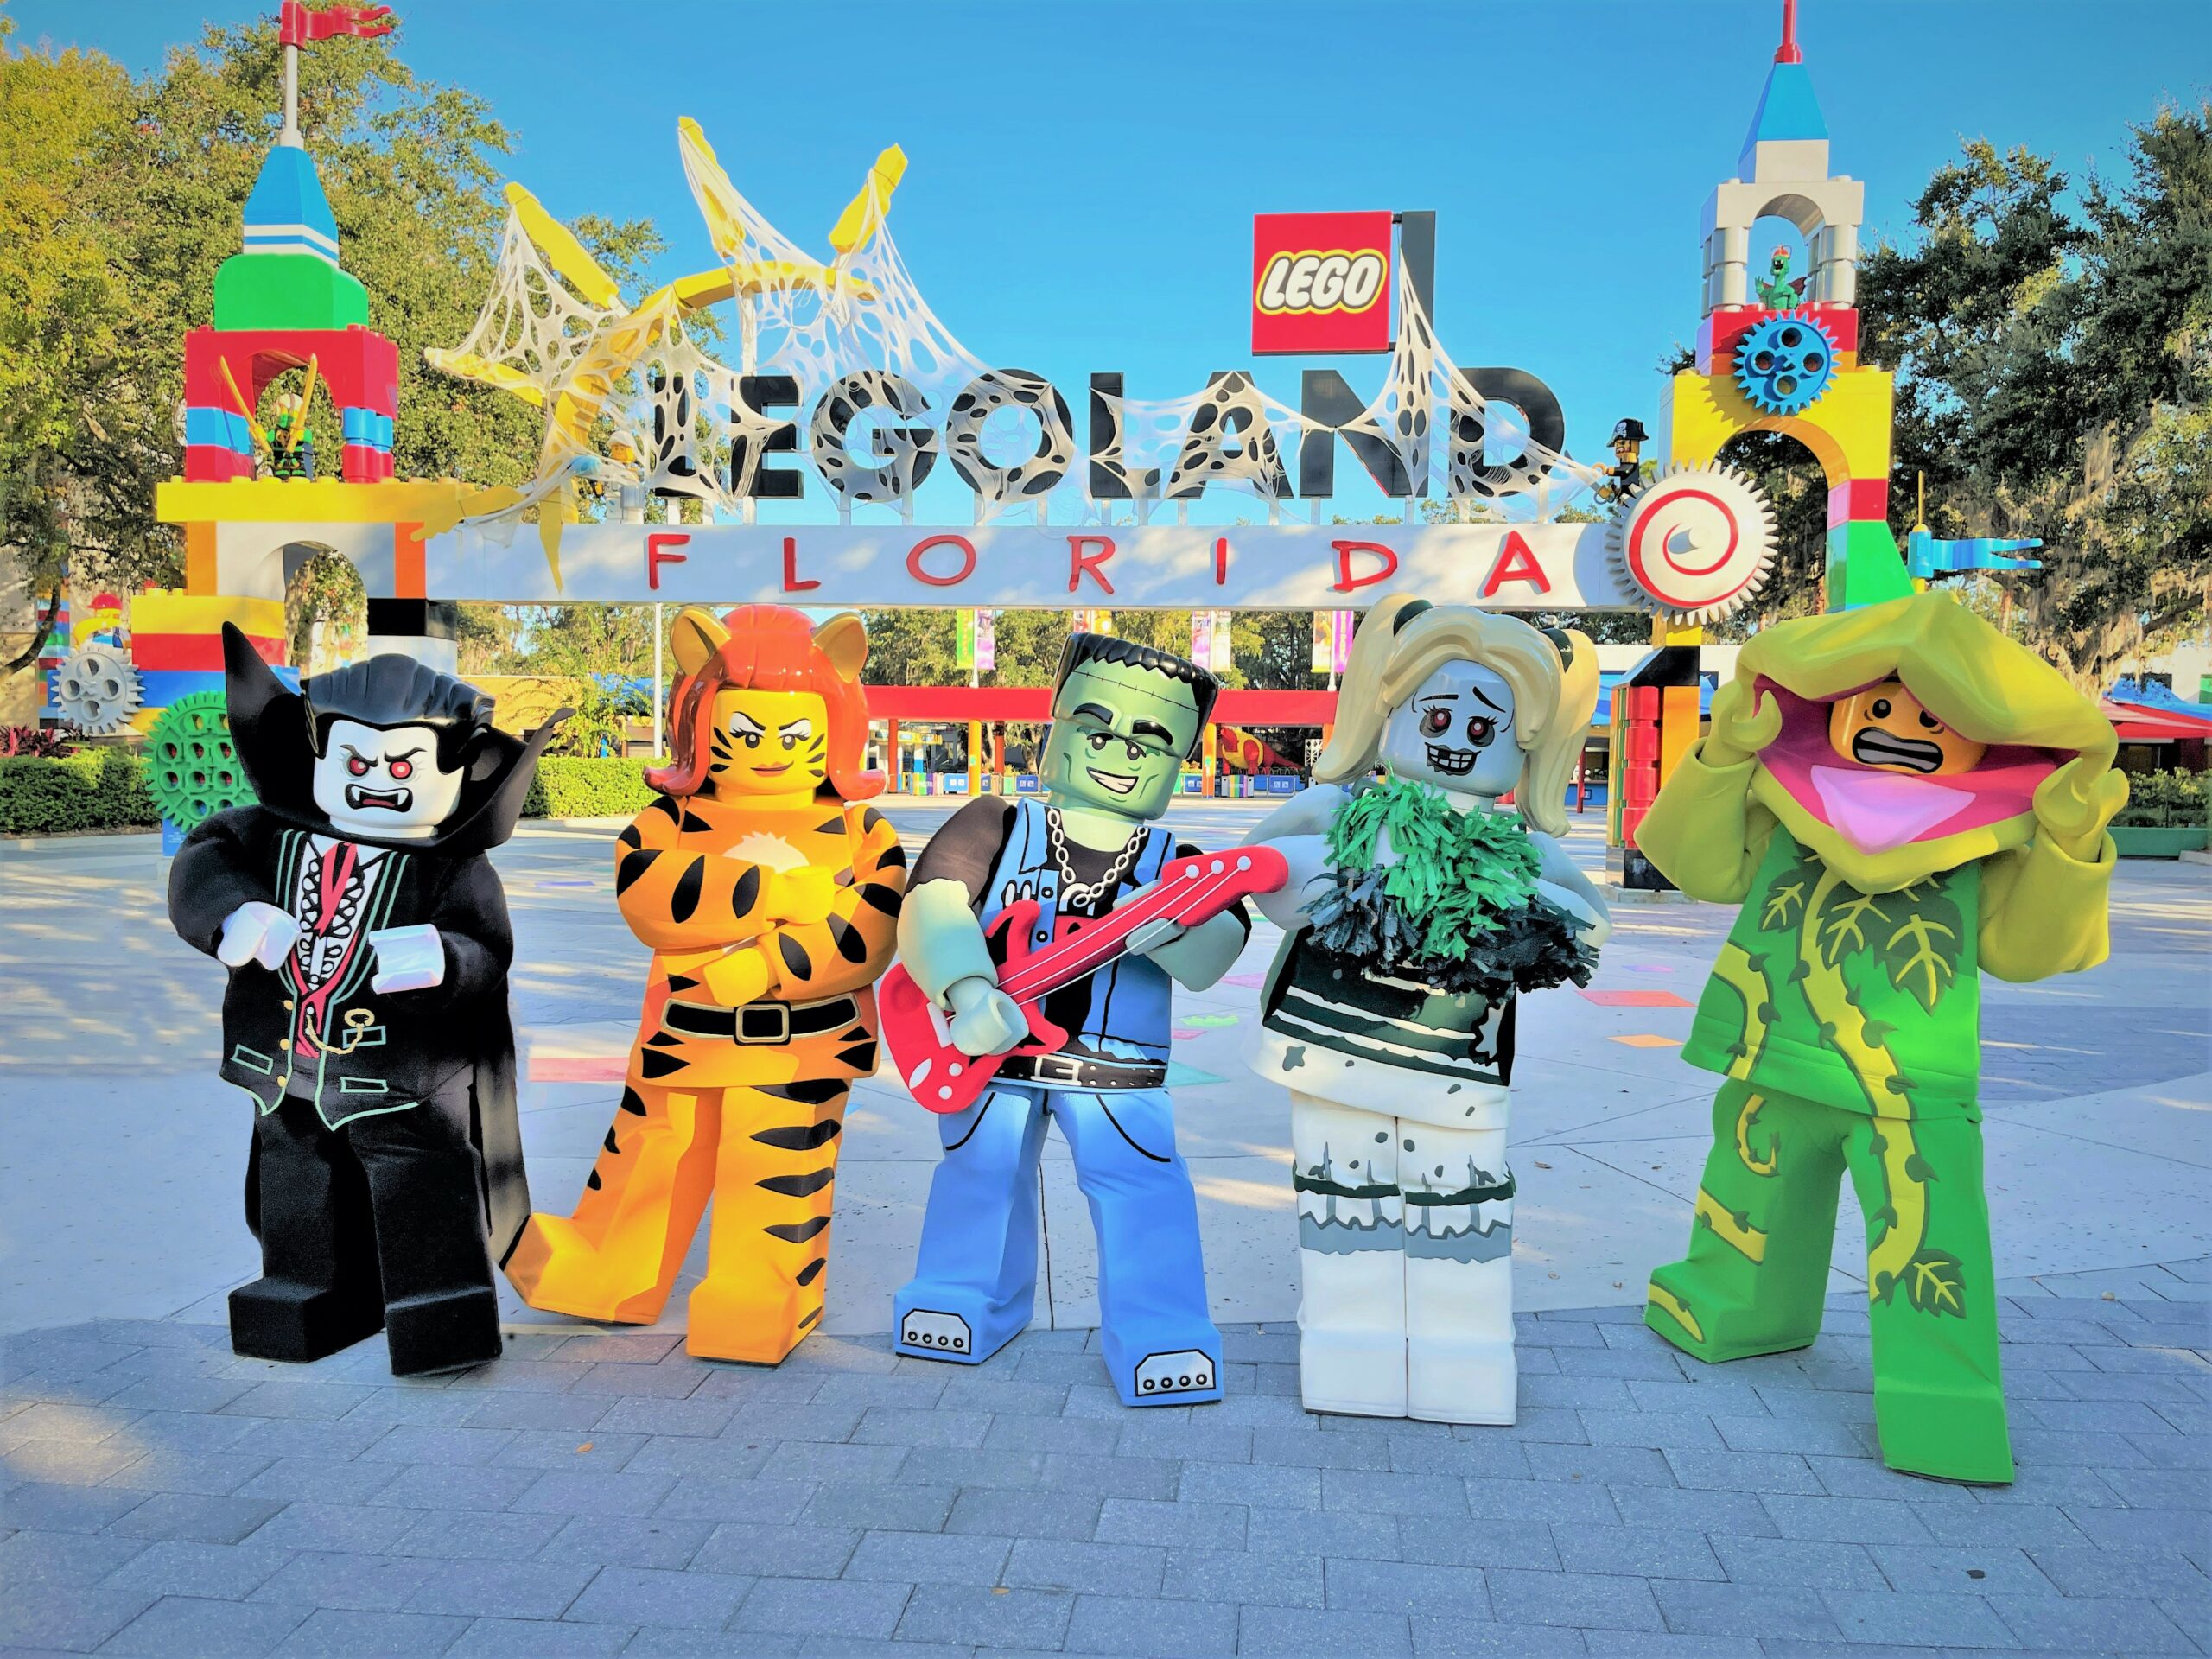 LEGO monsters in front of LEGOLAND Florida for Brick-or-Treat presents Monster Party